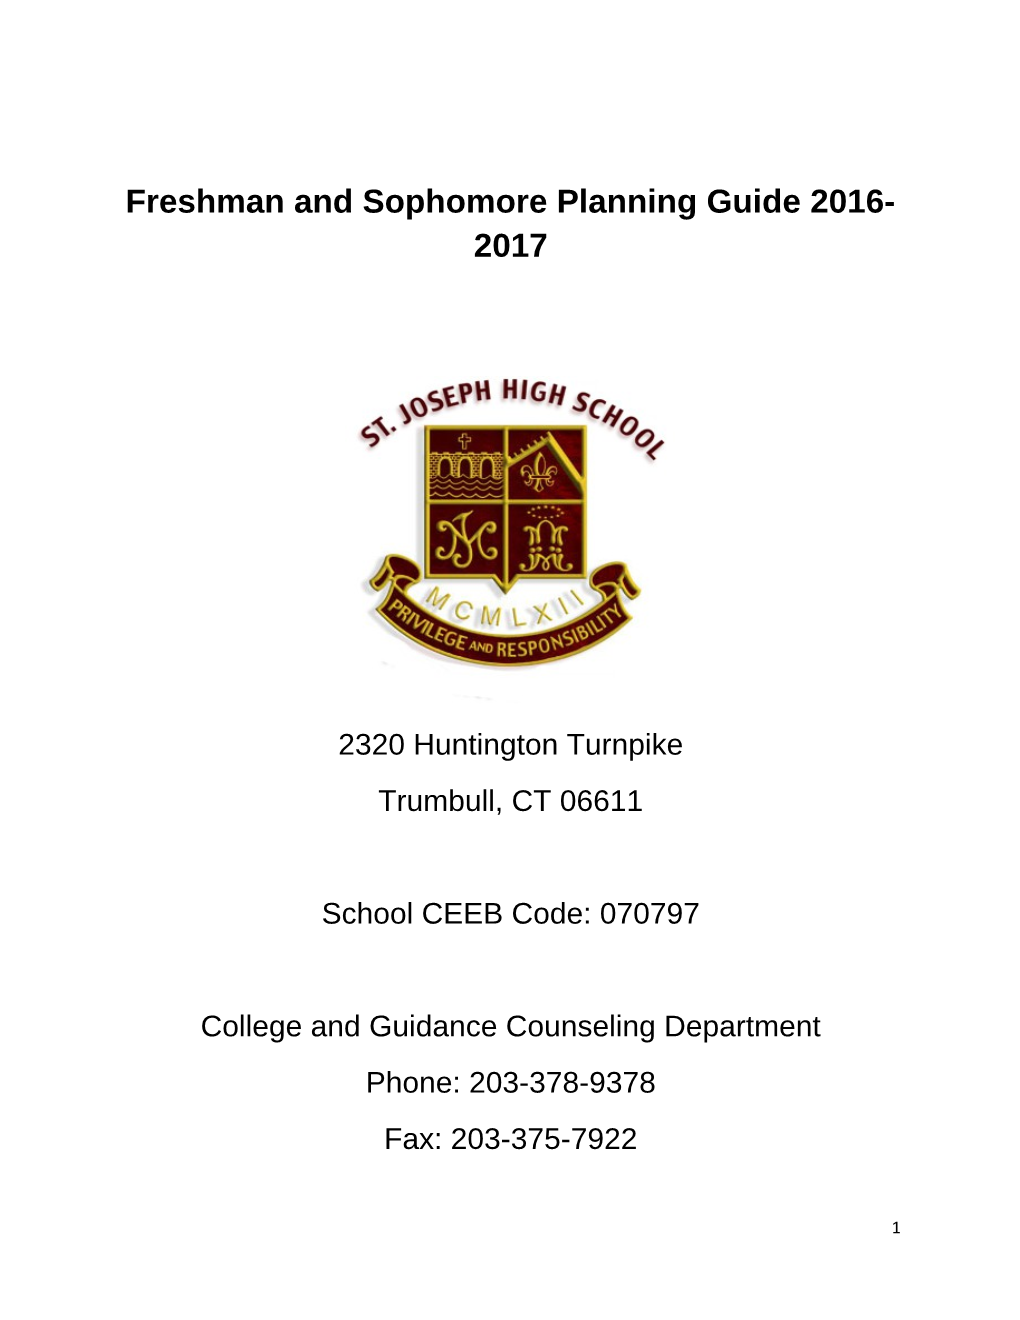 Freshman and Sophomore Planning Guide 2016-2017